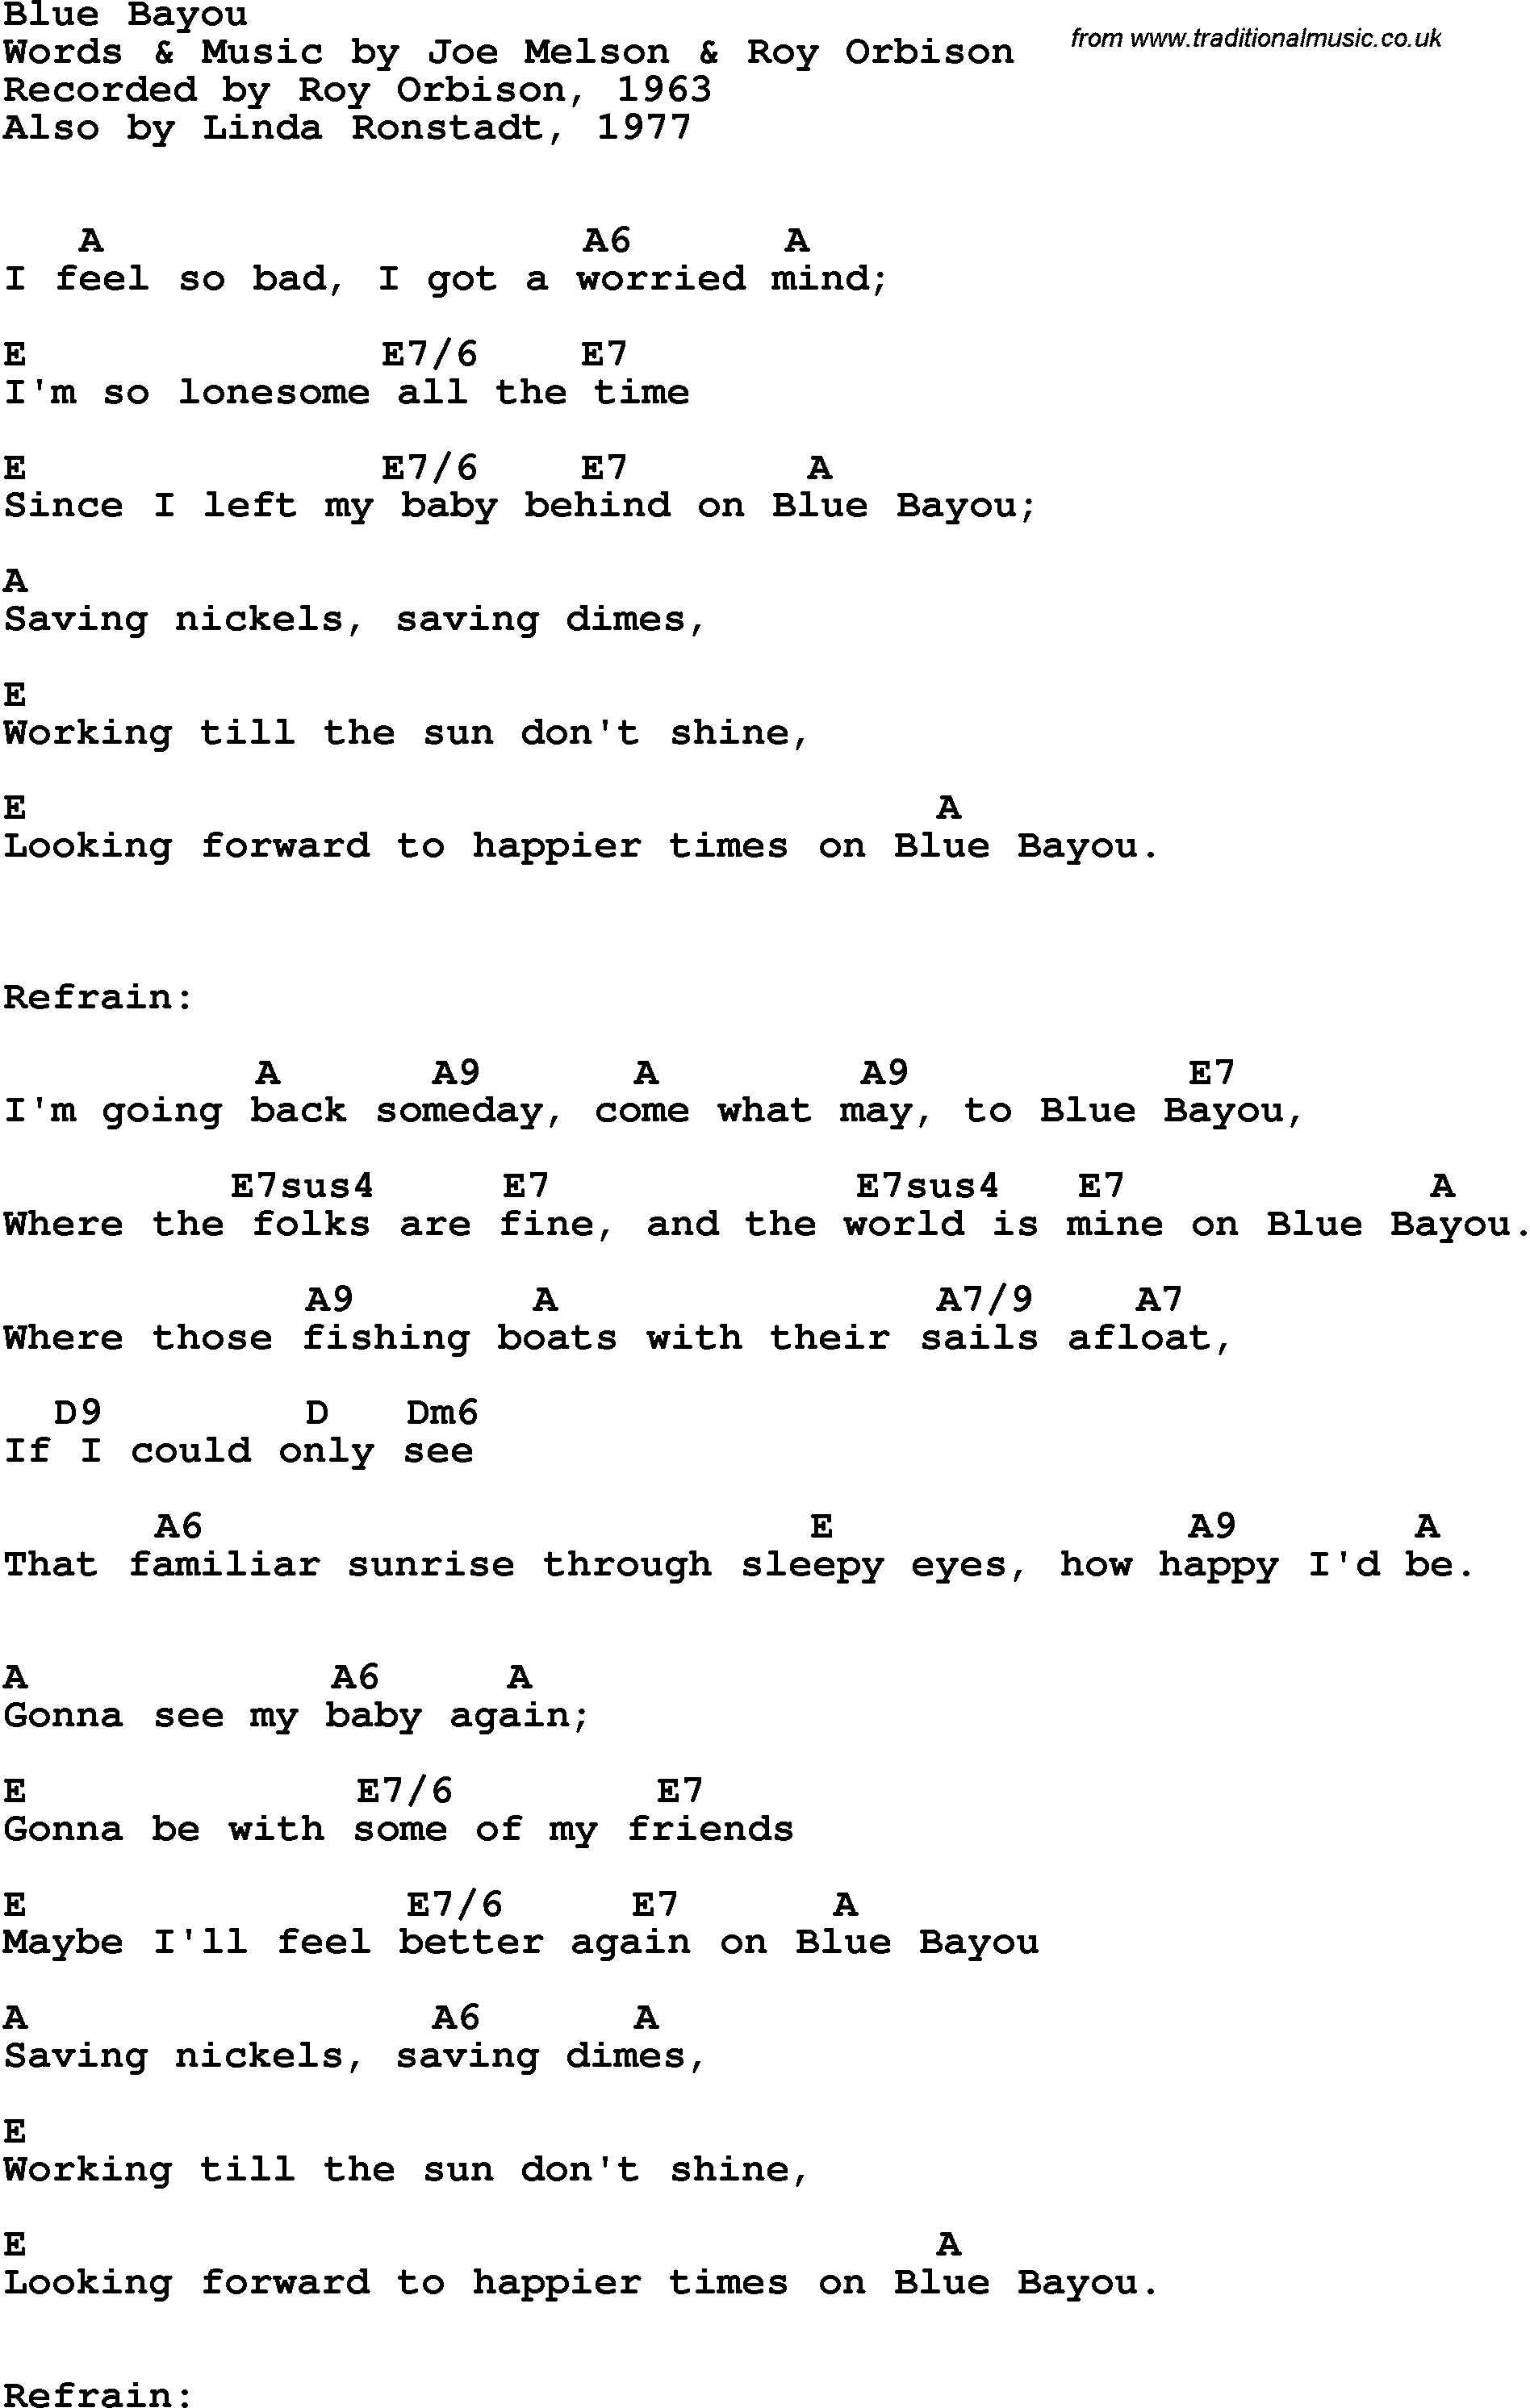 Song Lyrics with guitar chords for Blue Bayou - Roy Orbison, 1963